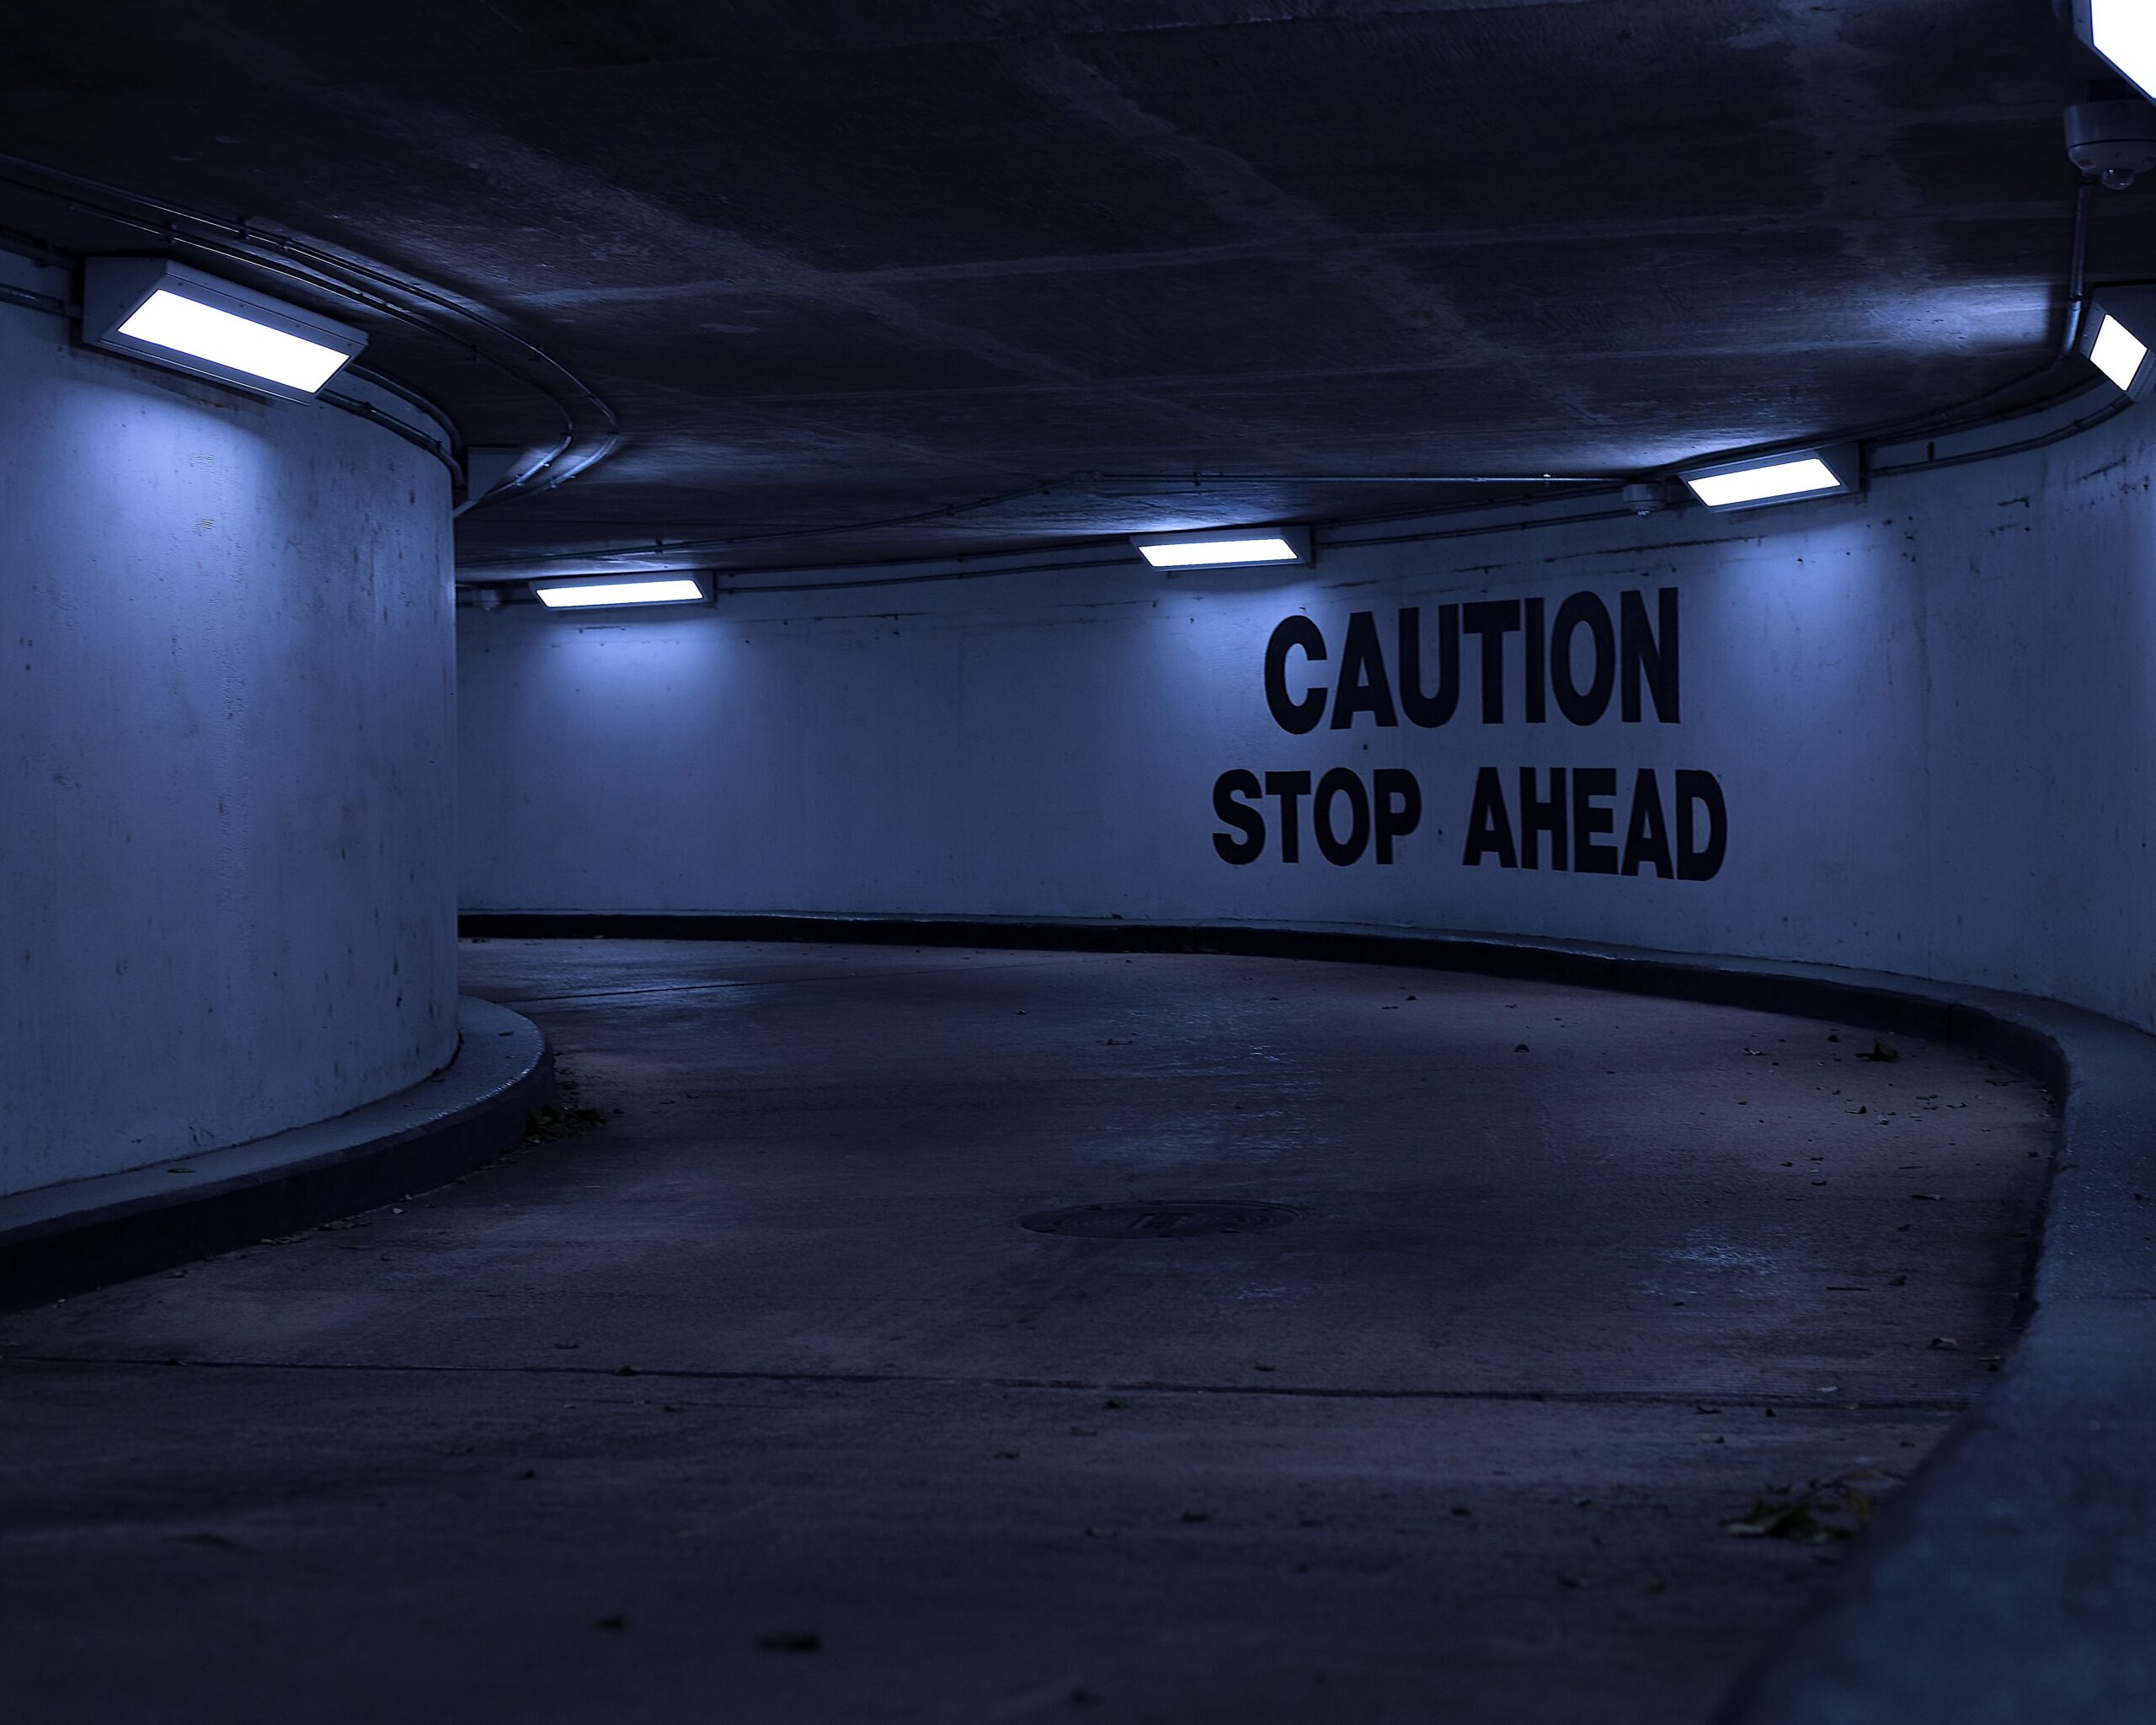 A picture of a dark narrowing road with the words "Caution: Stop Ahead" on the wall. This image was used to visualize the importance of proceeding with caution when working with AI and other related technology.